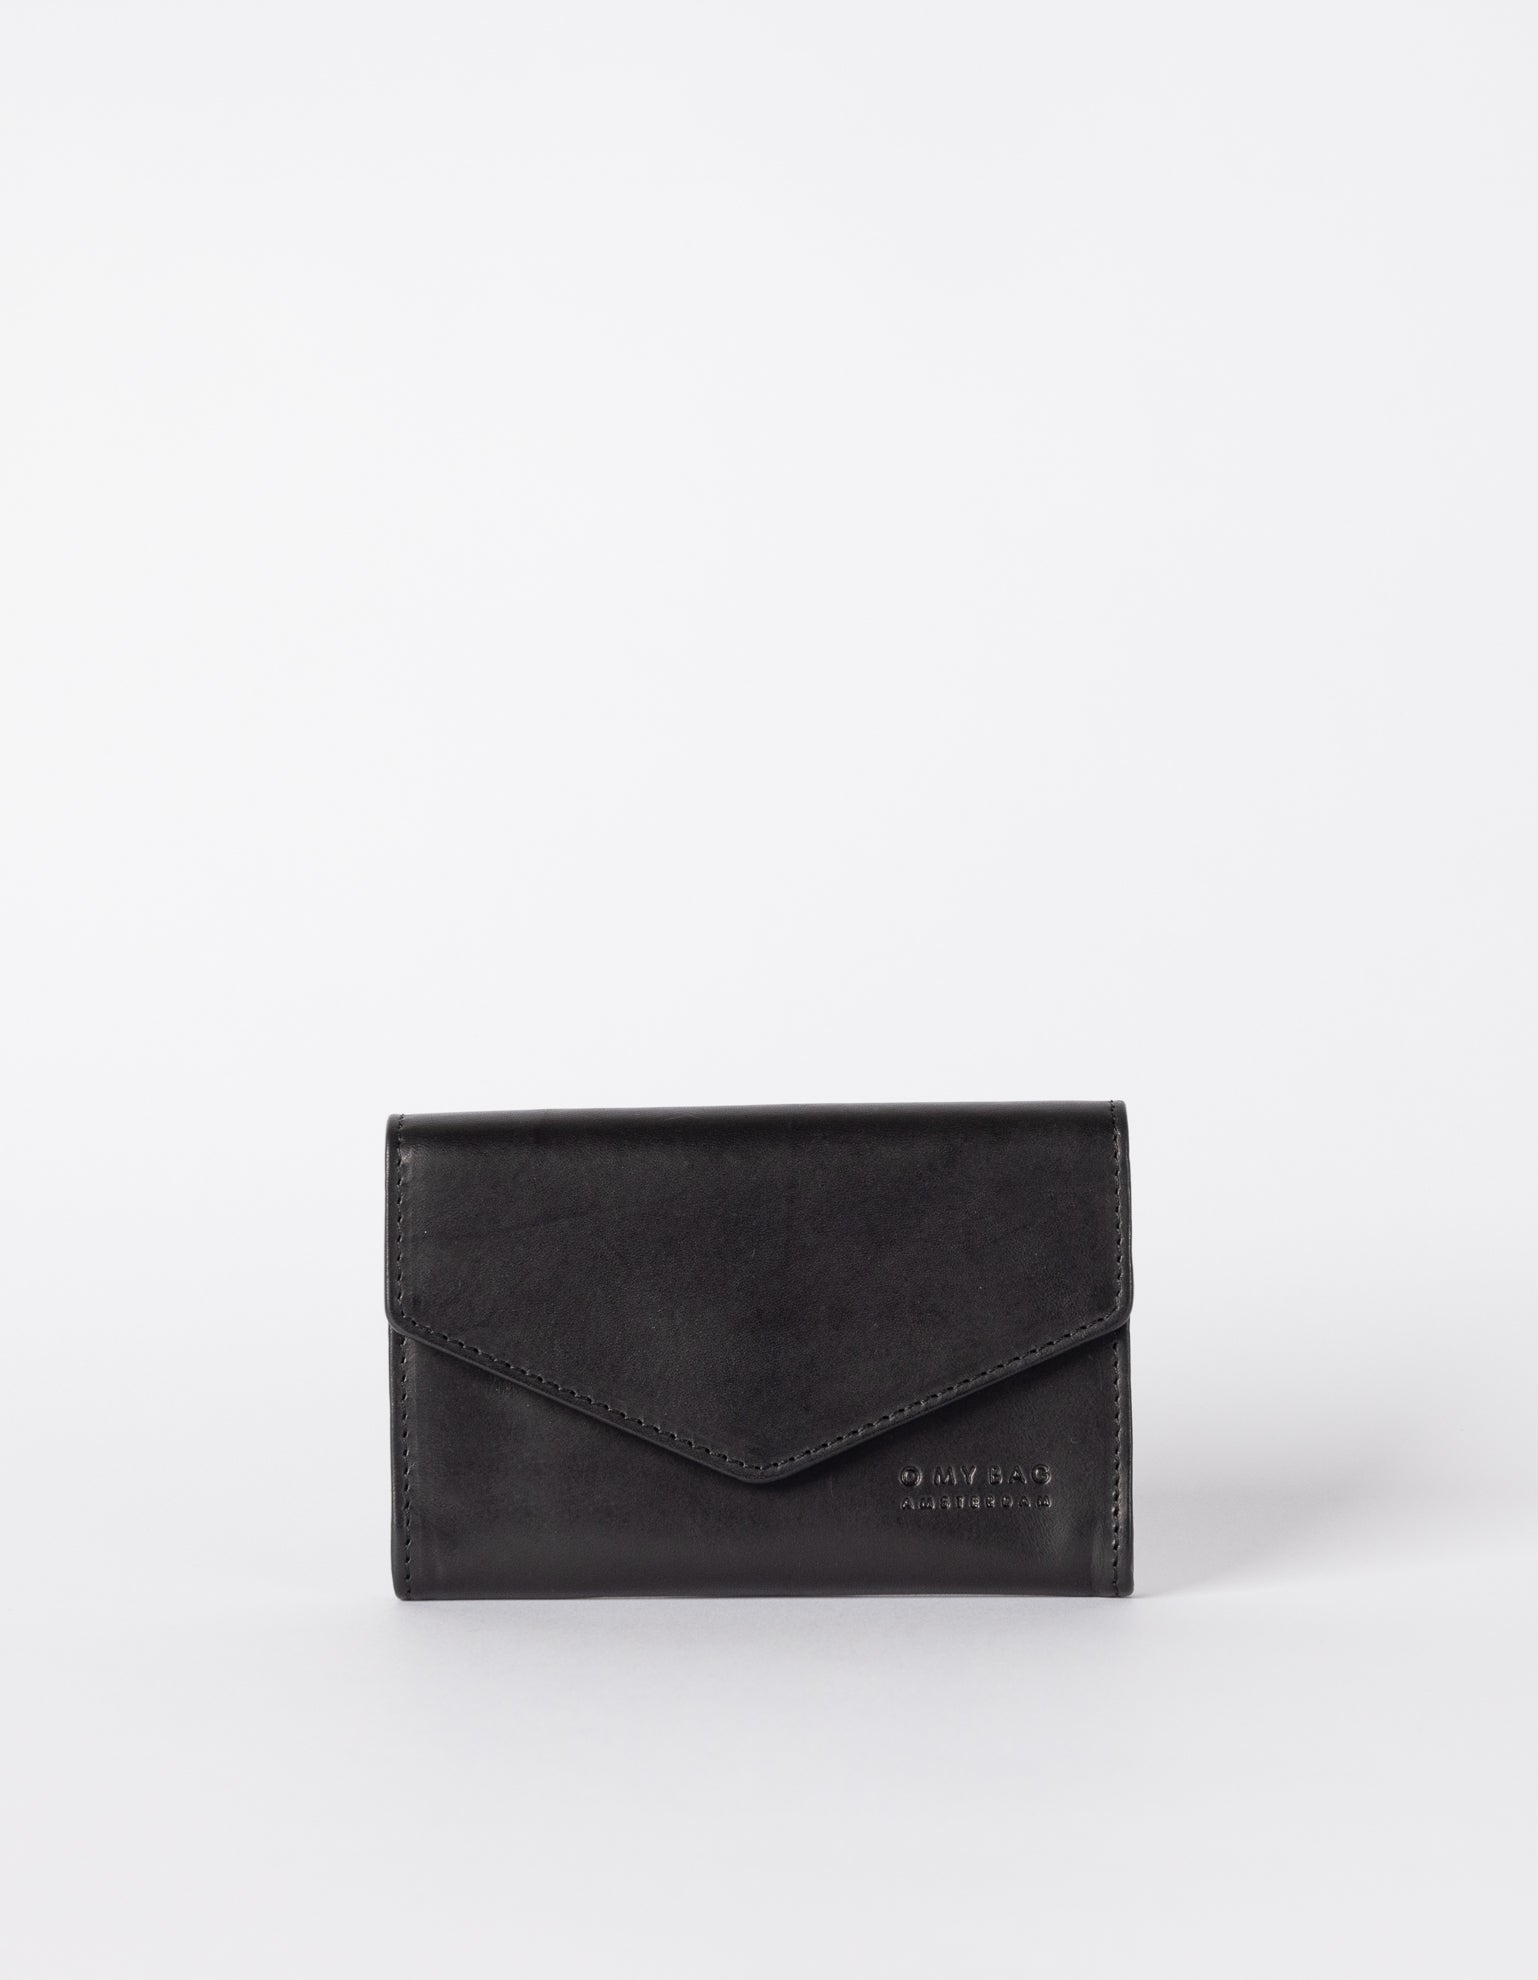 Black classic leather purse - front product image